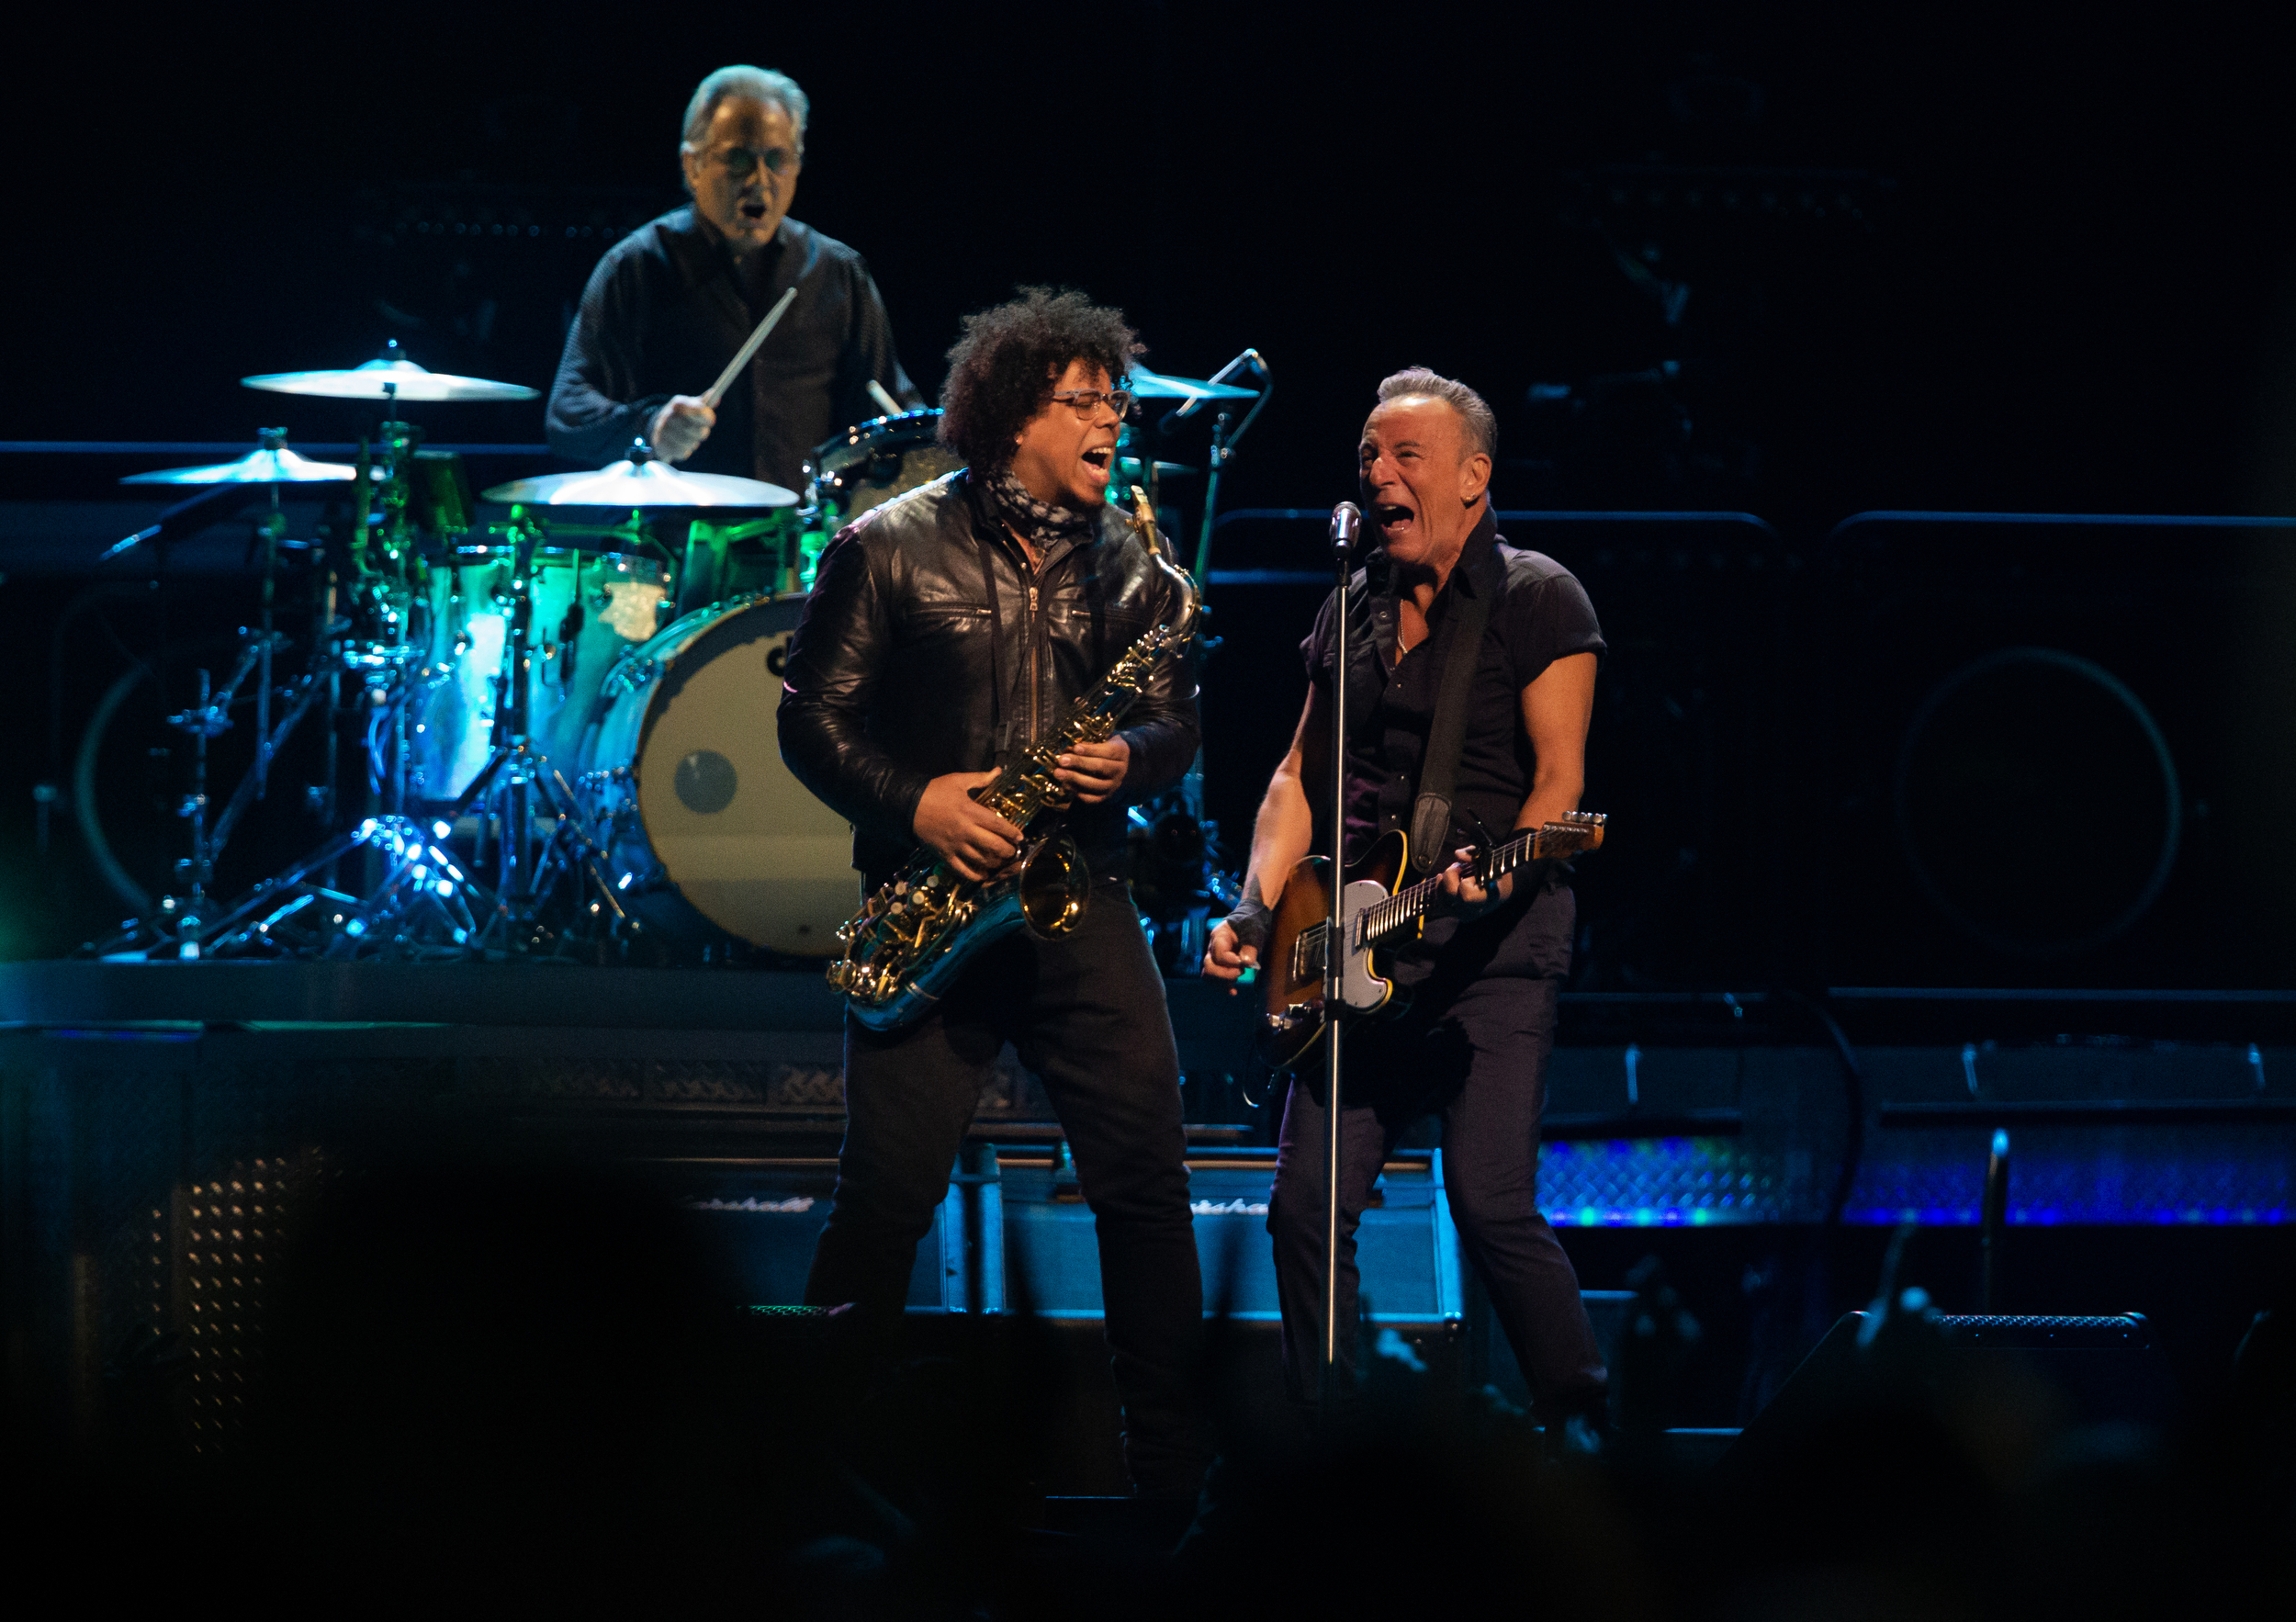 Bruce Springsteen performs at the Moda Center in Portland